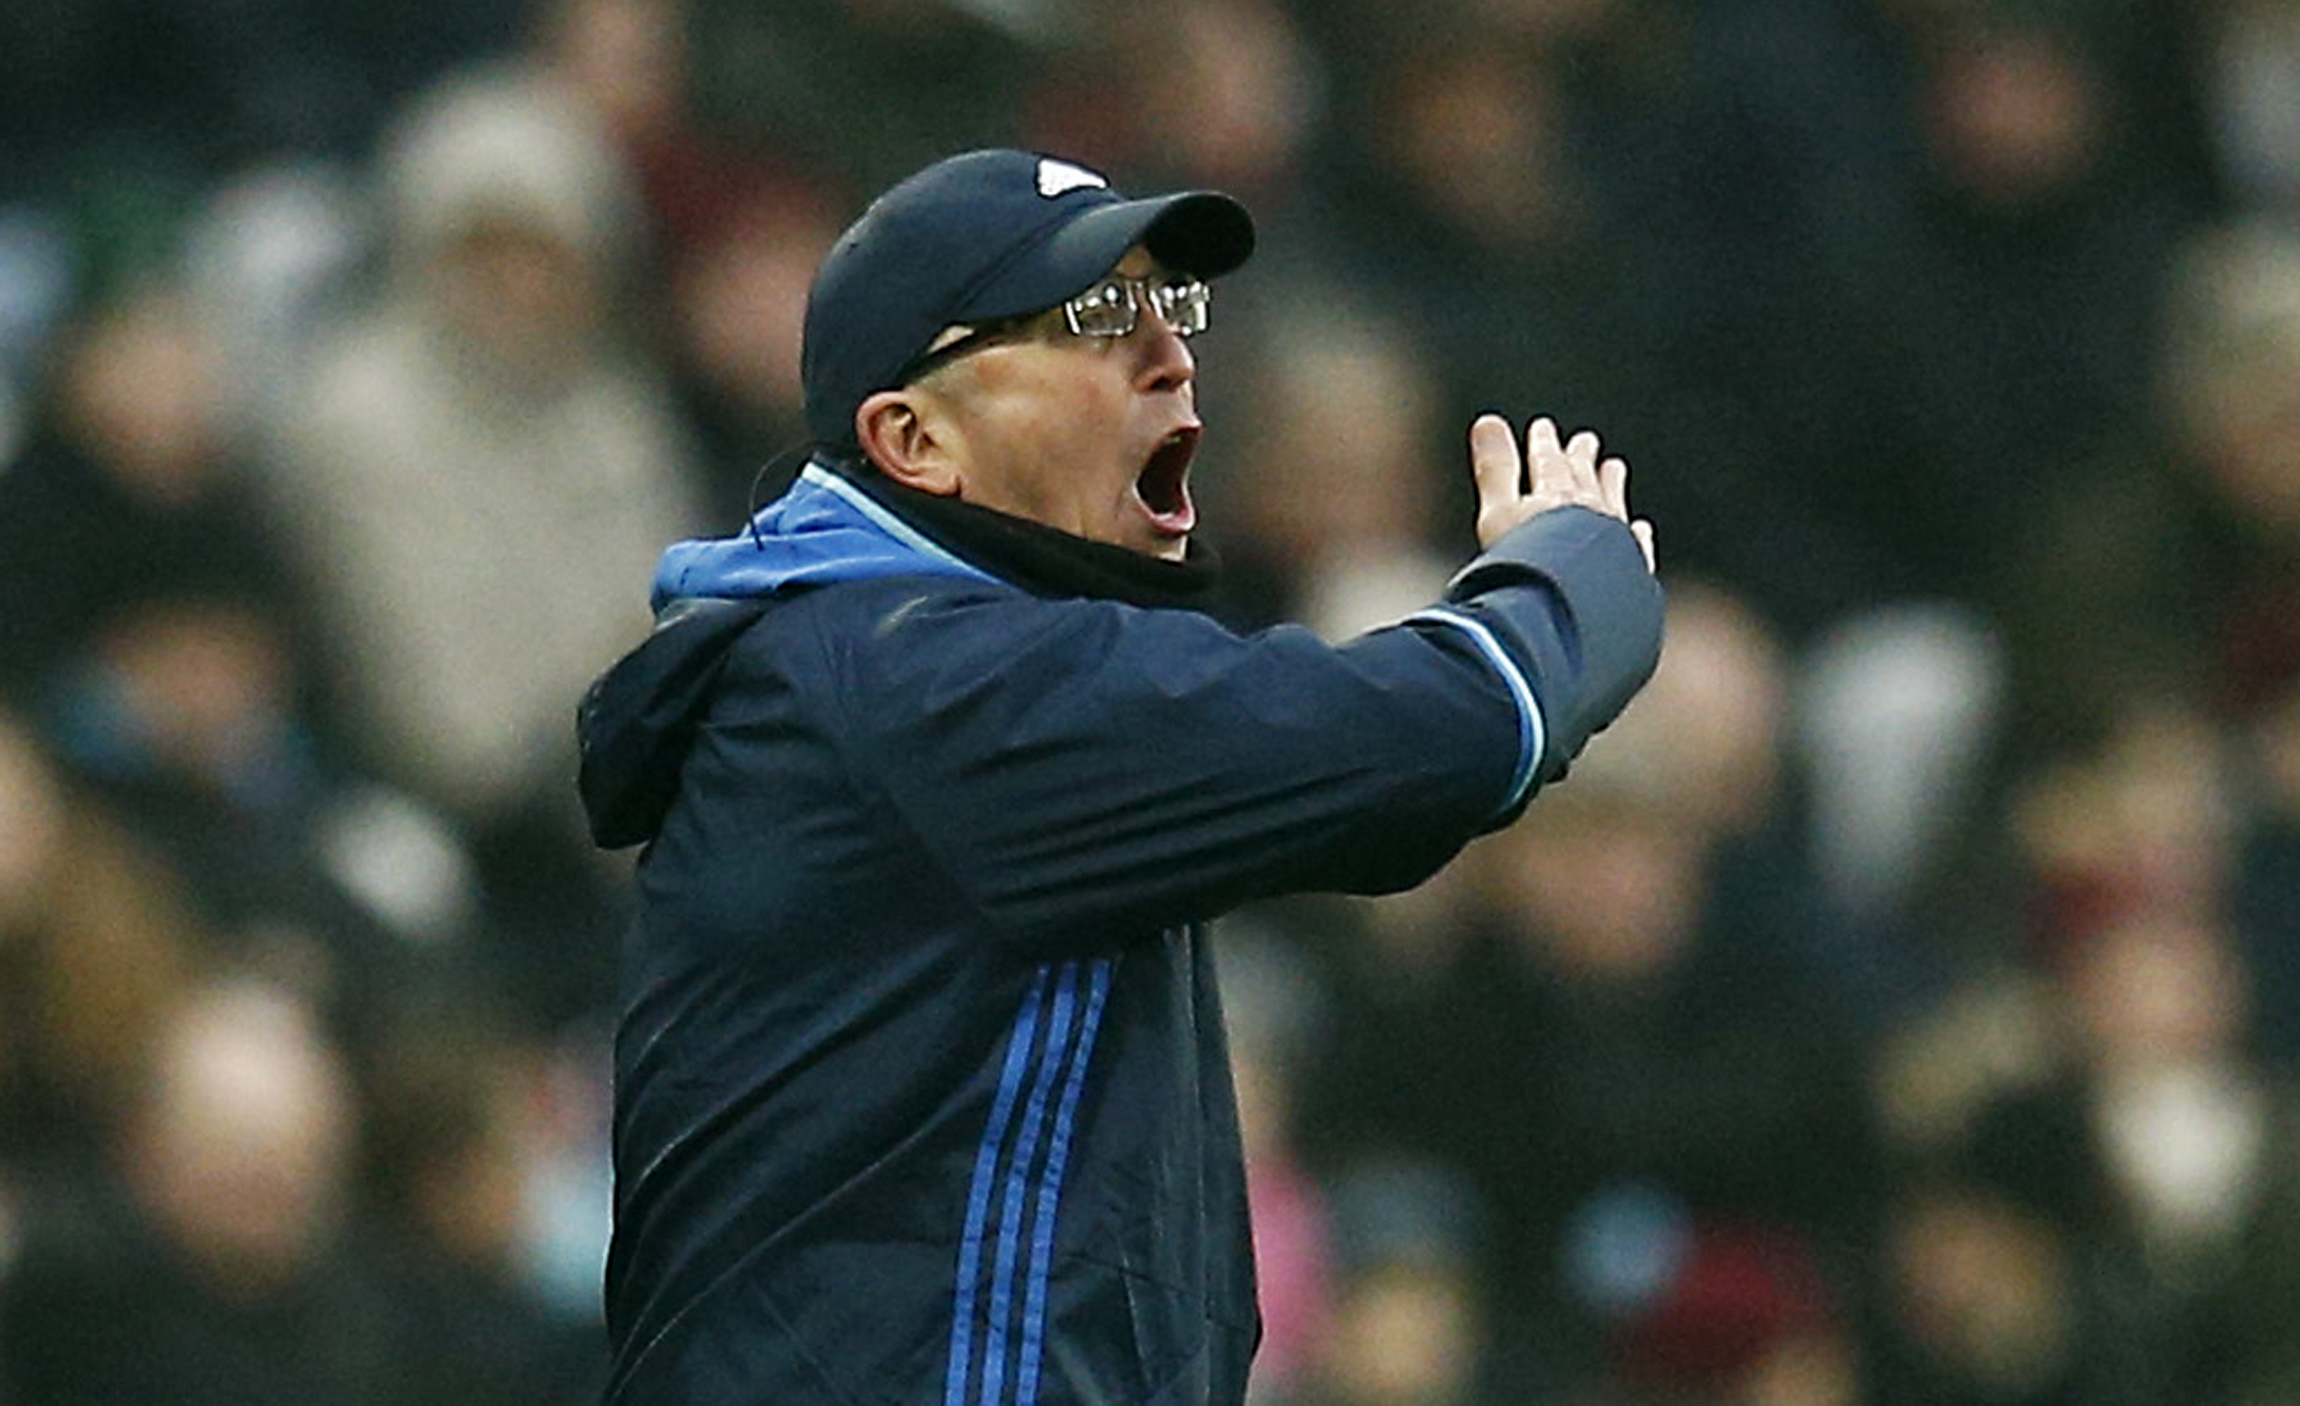 Football: West Brom's Pulis blasts Stoke for 'disgraceful' comments